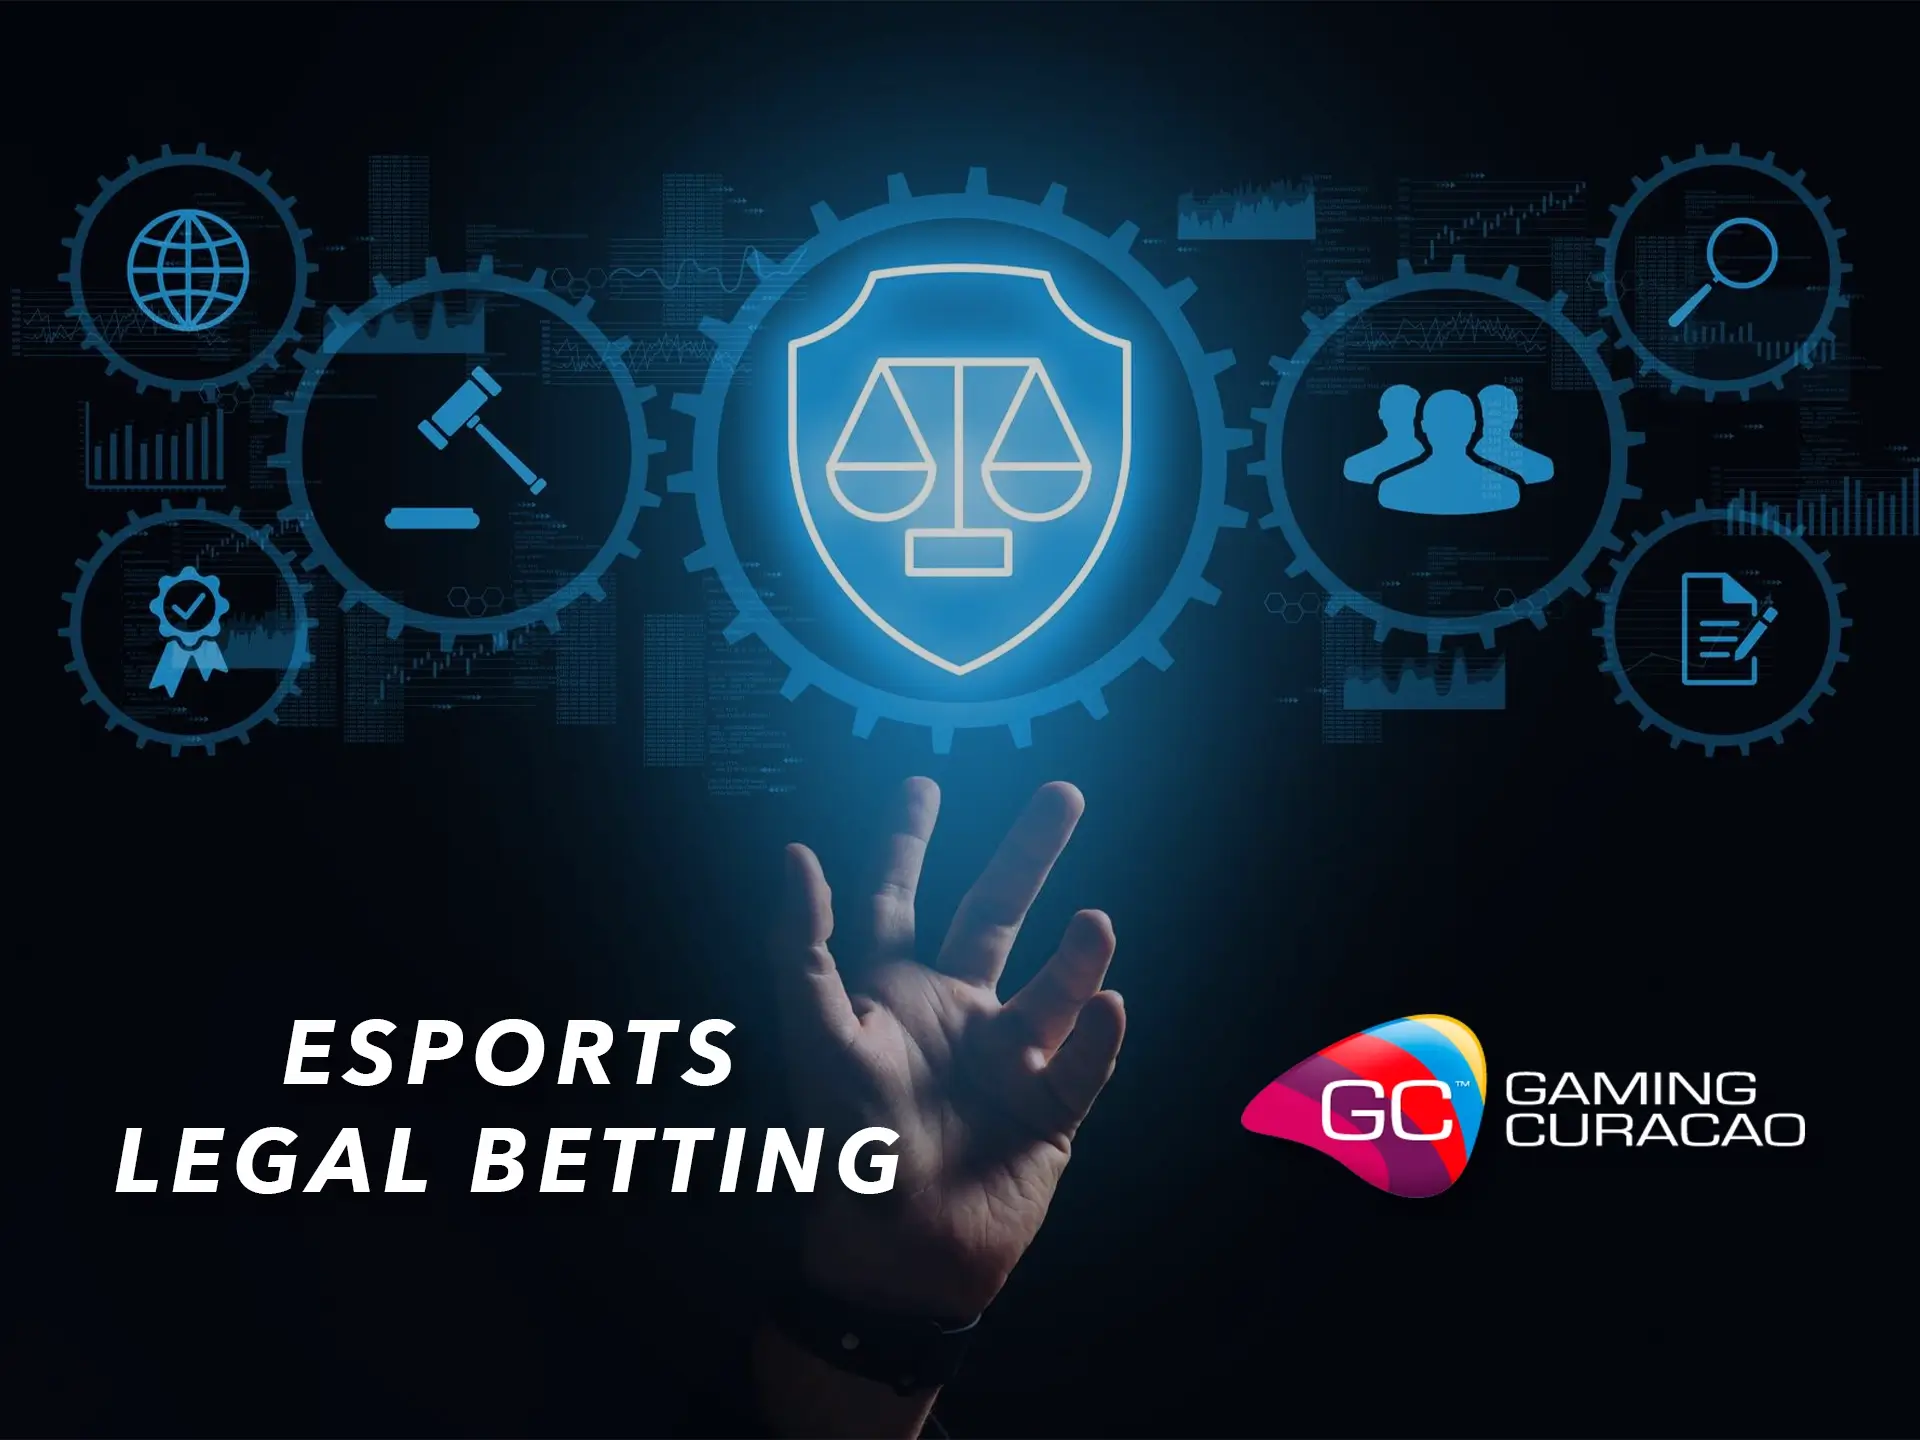 Cybersports is fully legal in India and is waiting for your predictions.